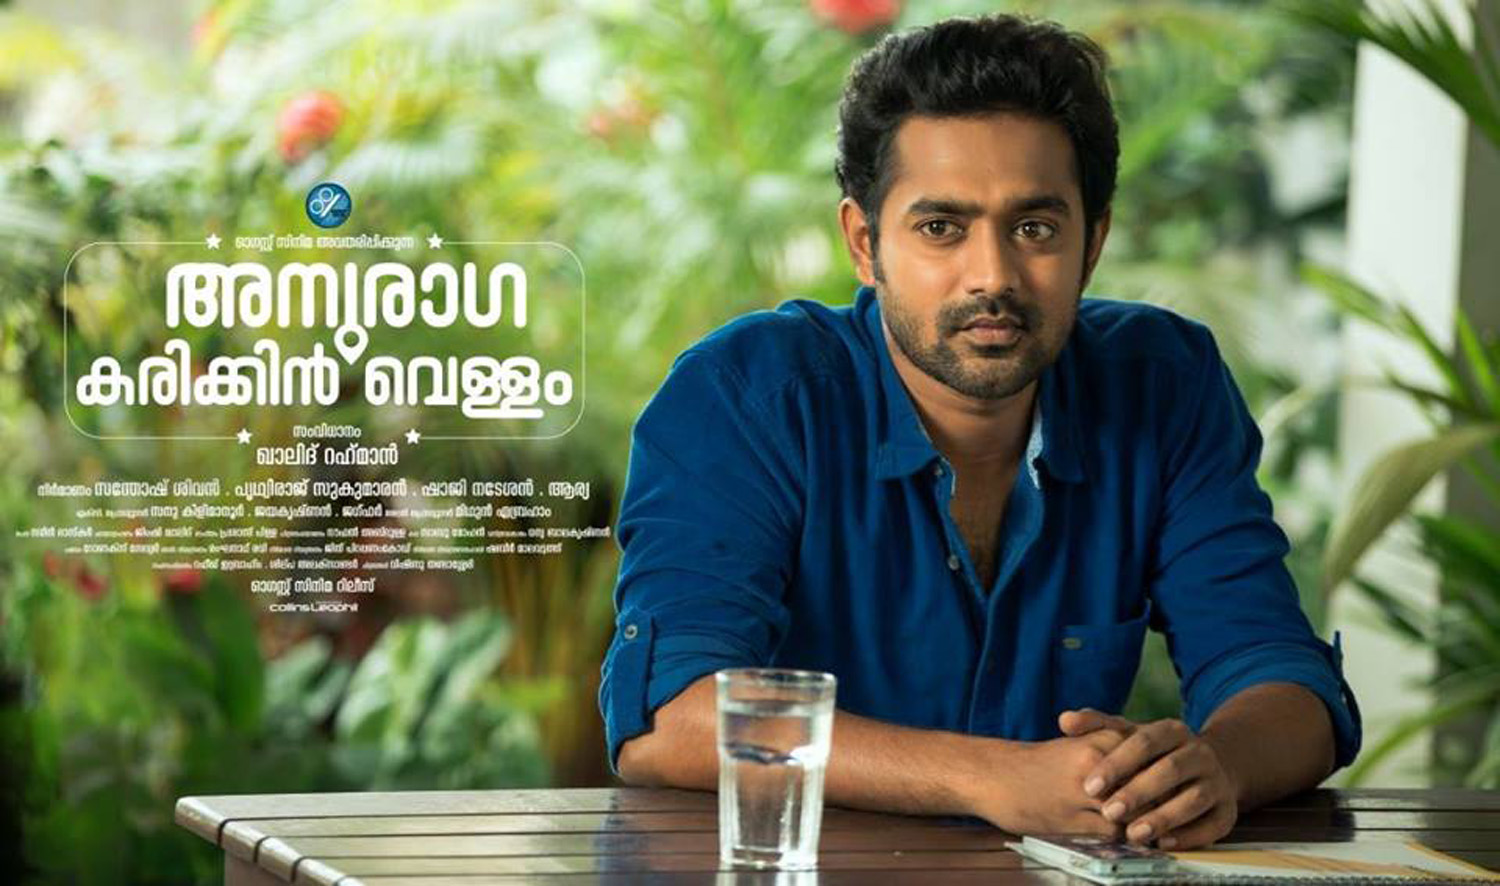 Anuraga Karikkin Vellam, Anuraga Karikkin Vellam review, Anuraga Karikkin Vellam rating, asif ali Anuraga Karikkin Vellam, Anuraga Karikkin Vellam movie review rating, best malayalam movie 2016